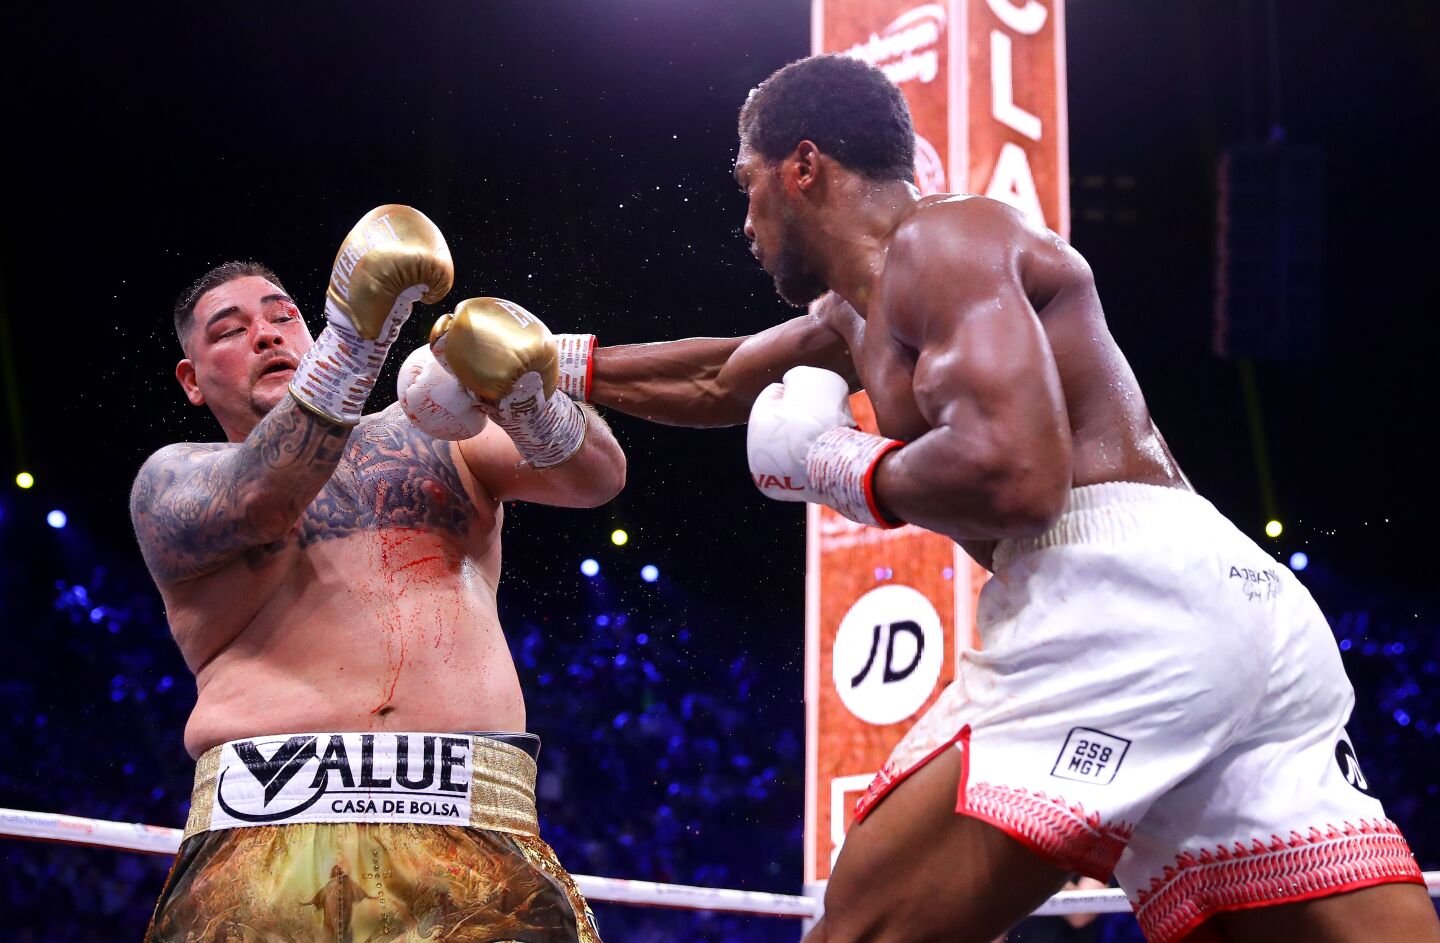 Anthony Joshua hits Andy Ruiz Jr. with a right hand during a heavyweight title fight on Dec. 7 in Diriyah, Saudi Arabia.